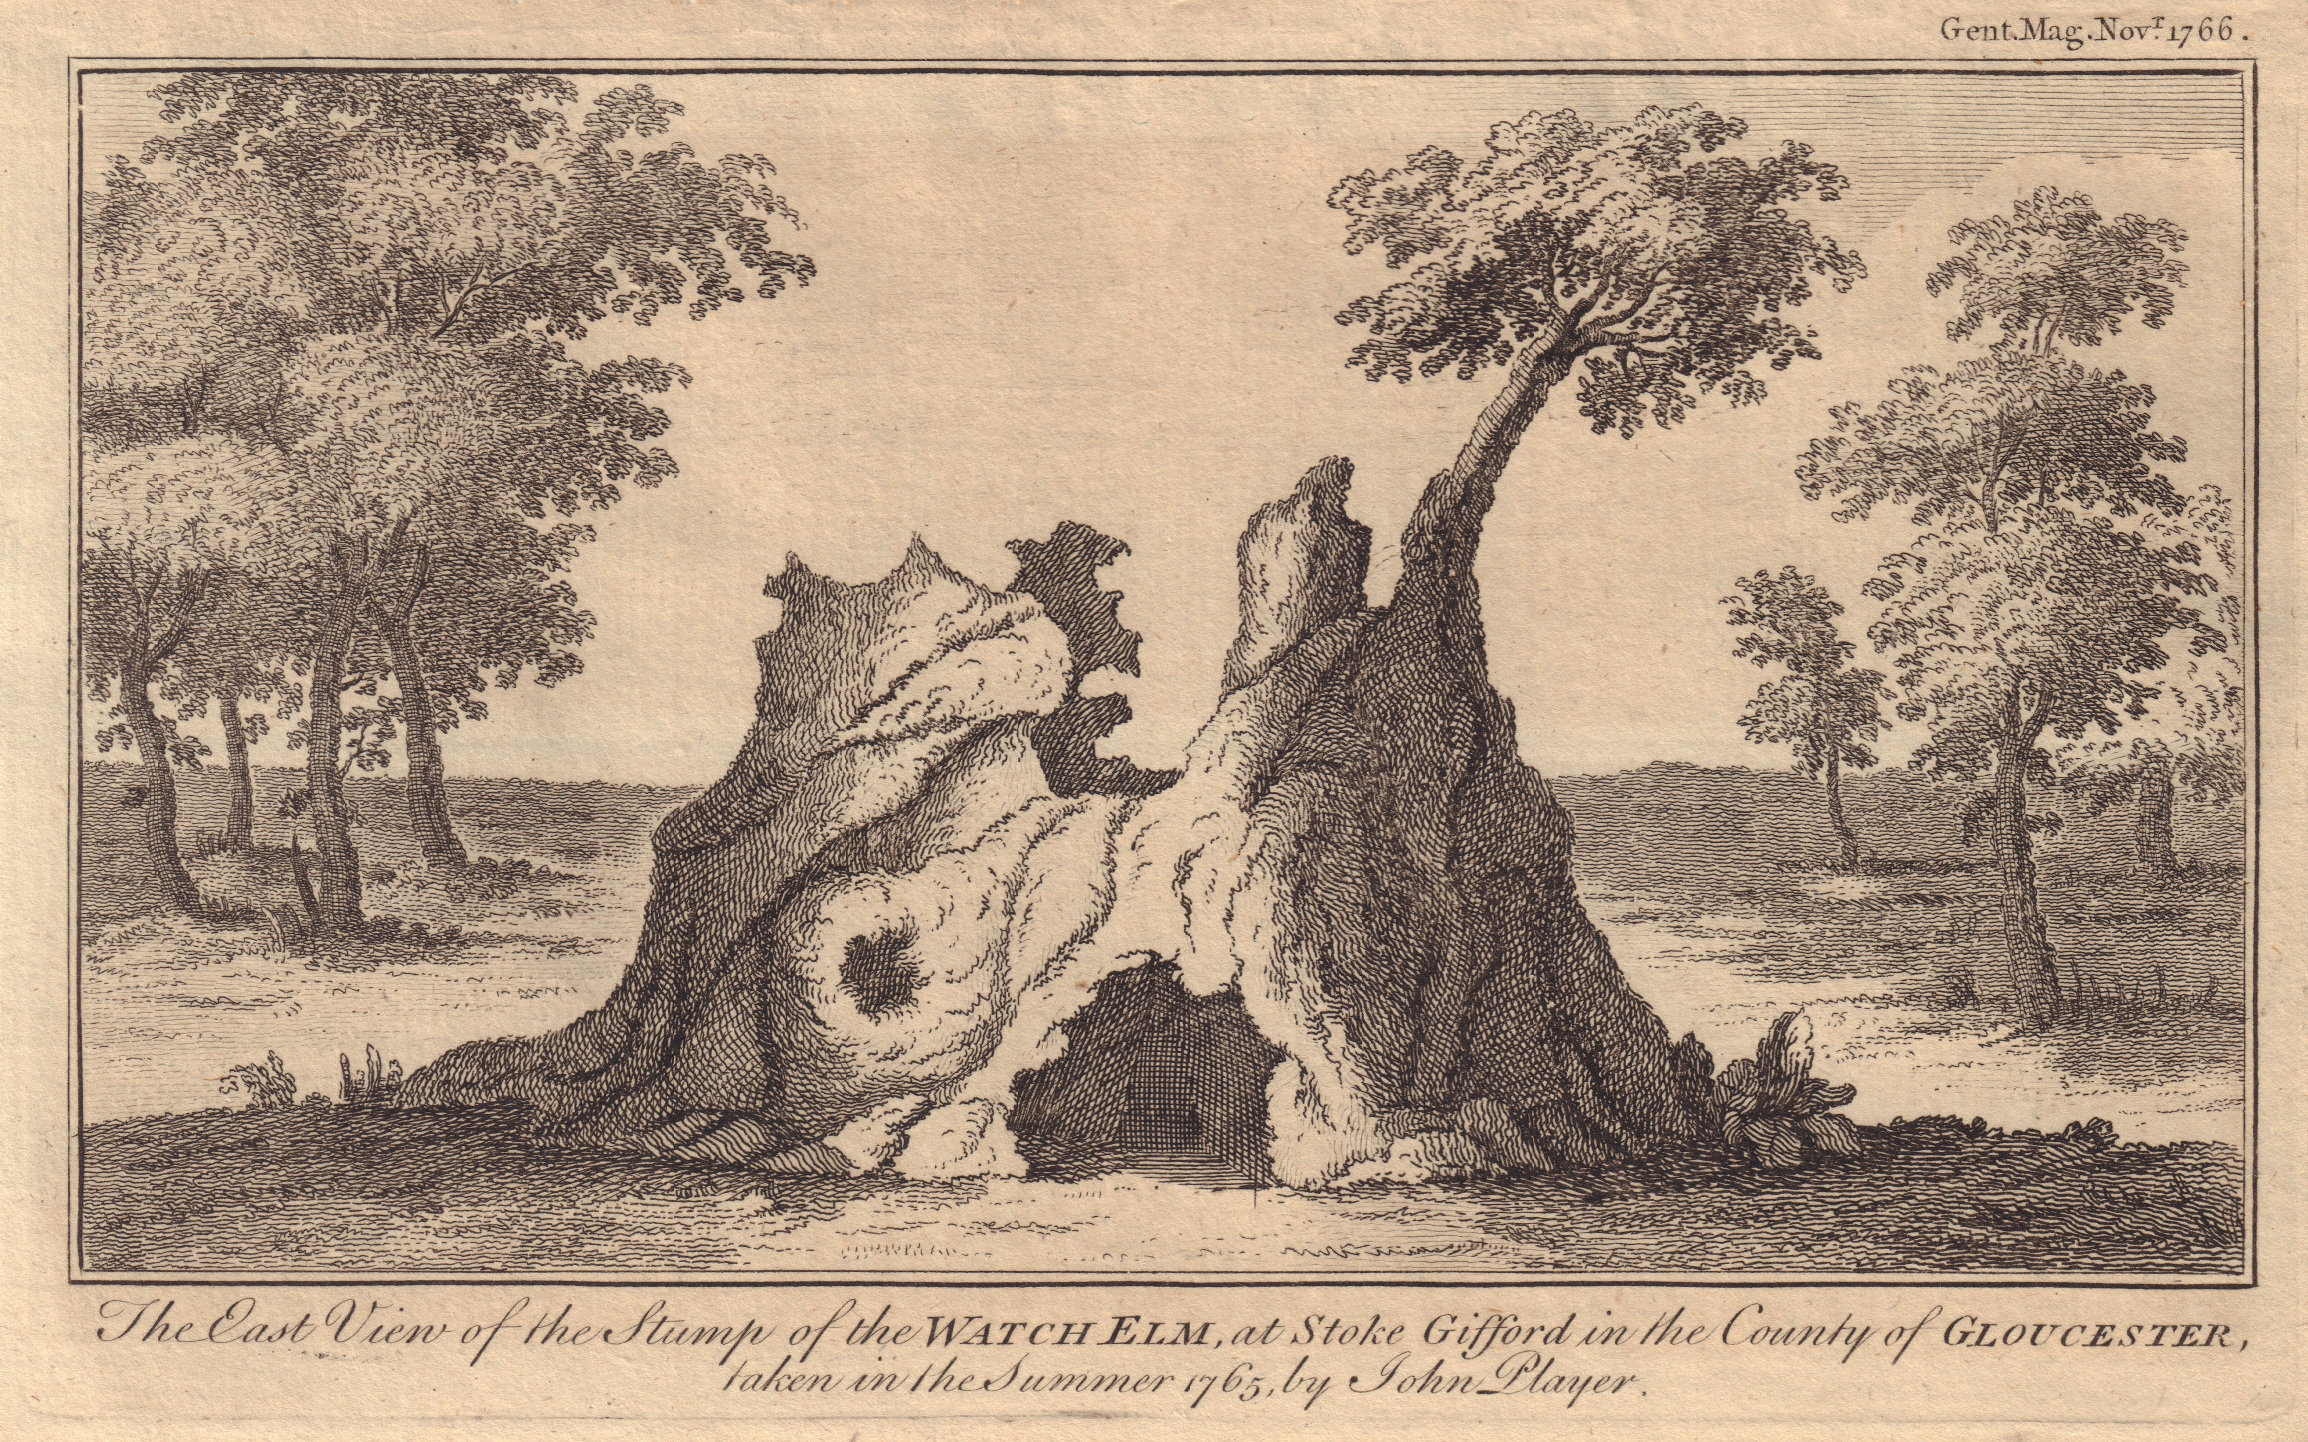 Associate Product Stump of the Watch Elm Tree, Stoke Gifford, Gloucestershire. GENTS MAG 1766